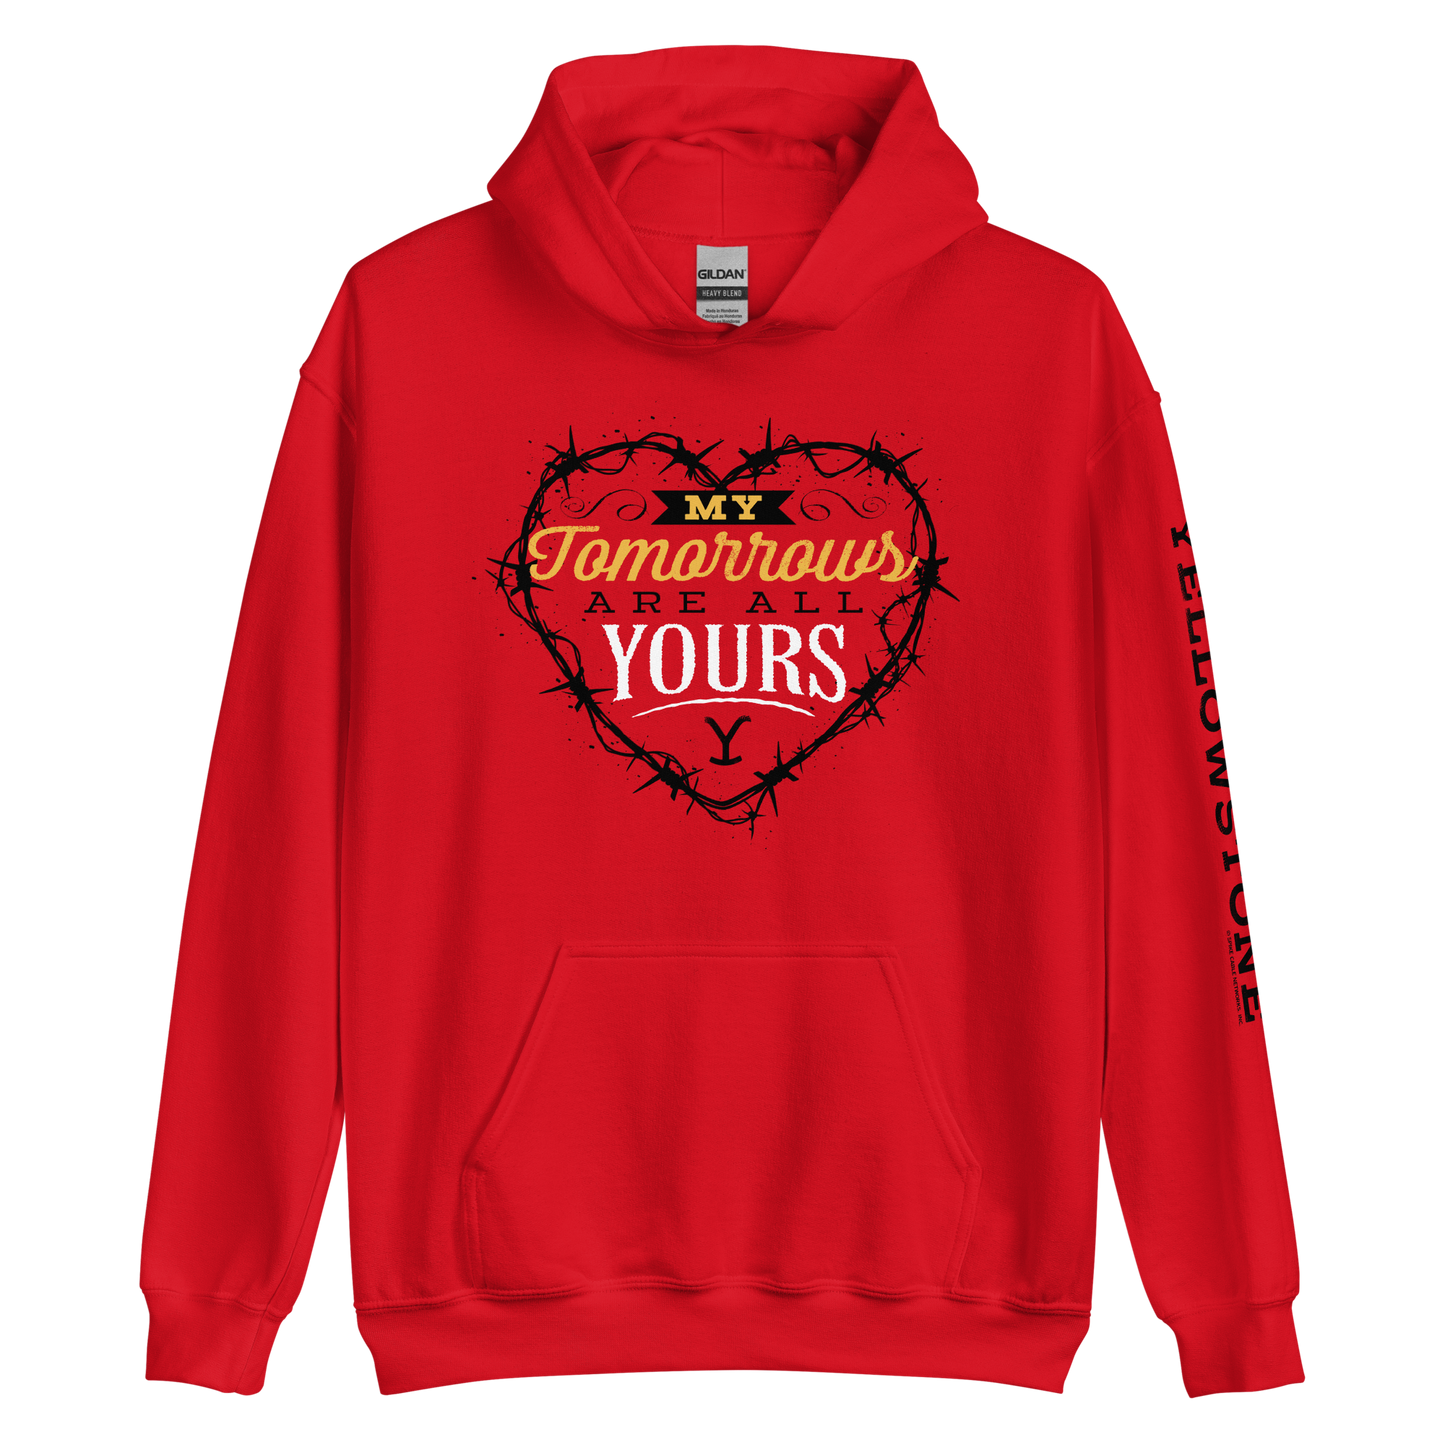 Yellowstone My Tomorrows Are All Yours Sweatshirt à capuche